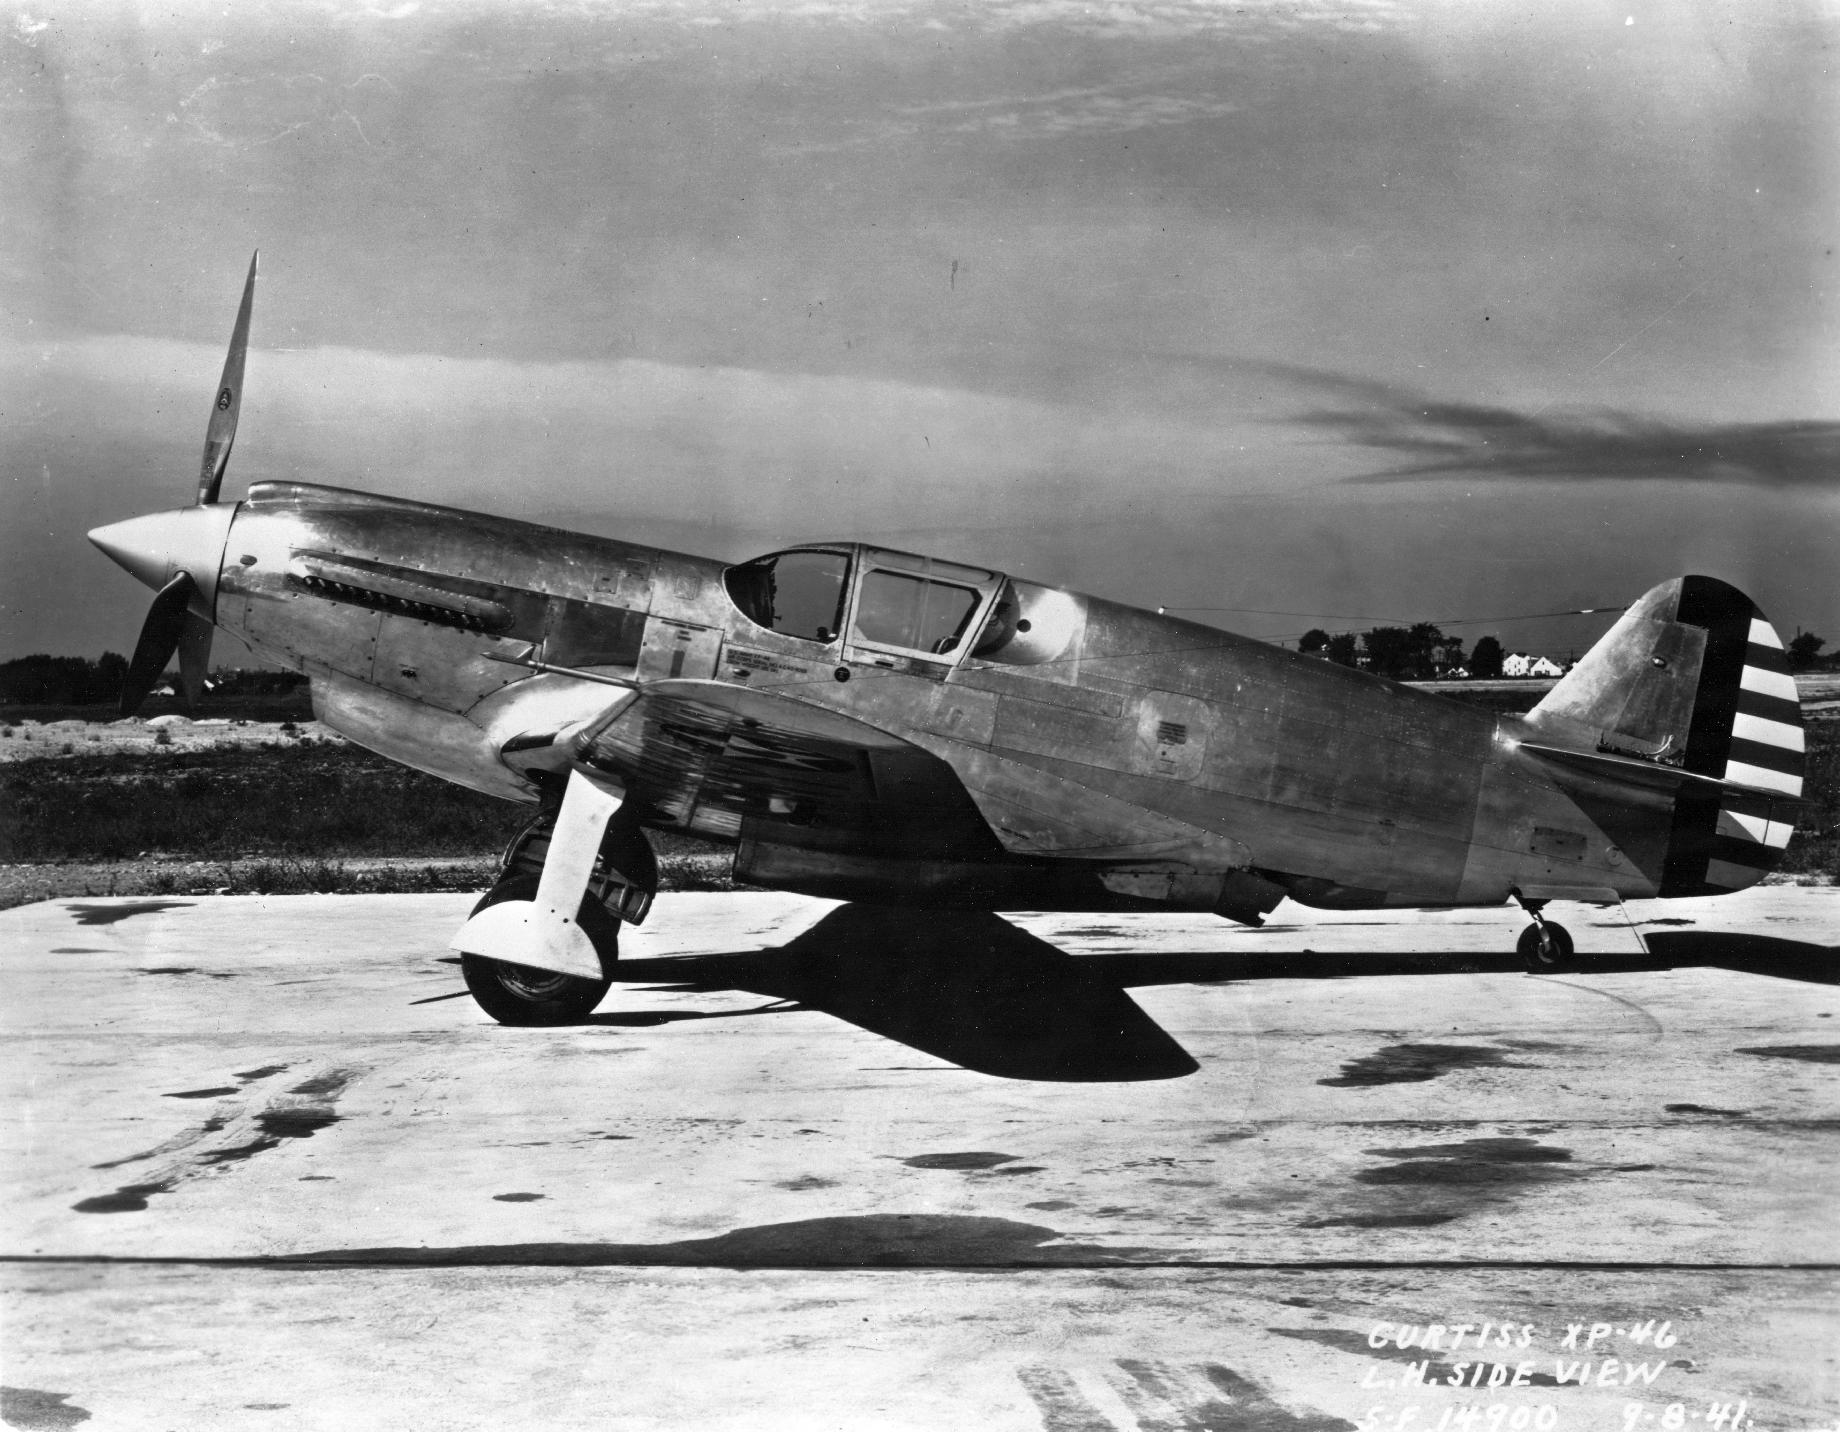 Curtiss_XP-46_side_view